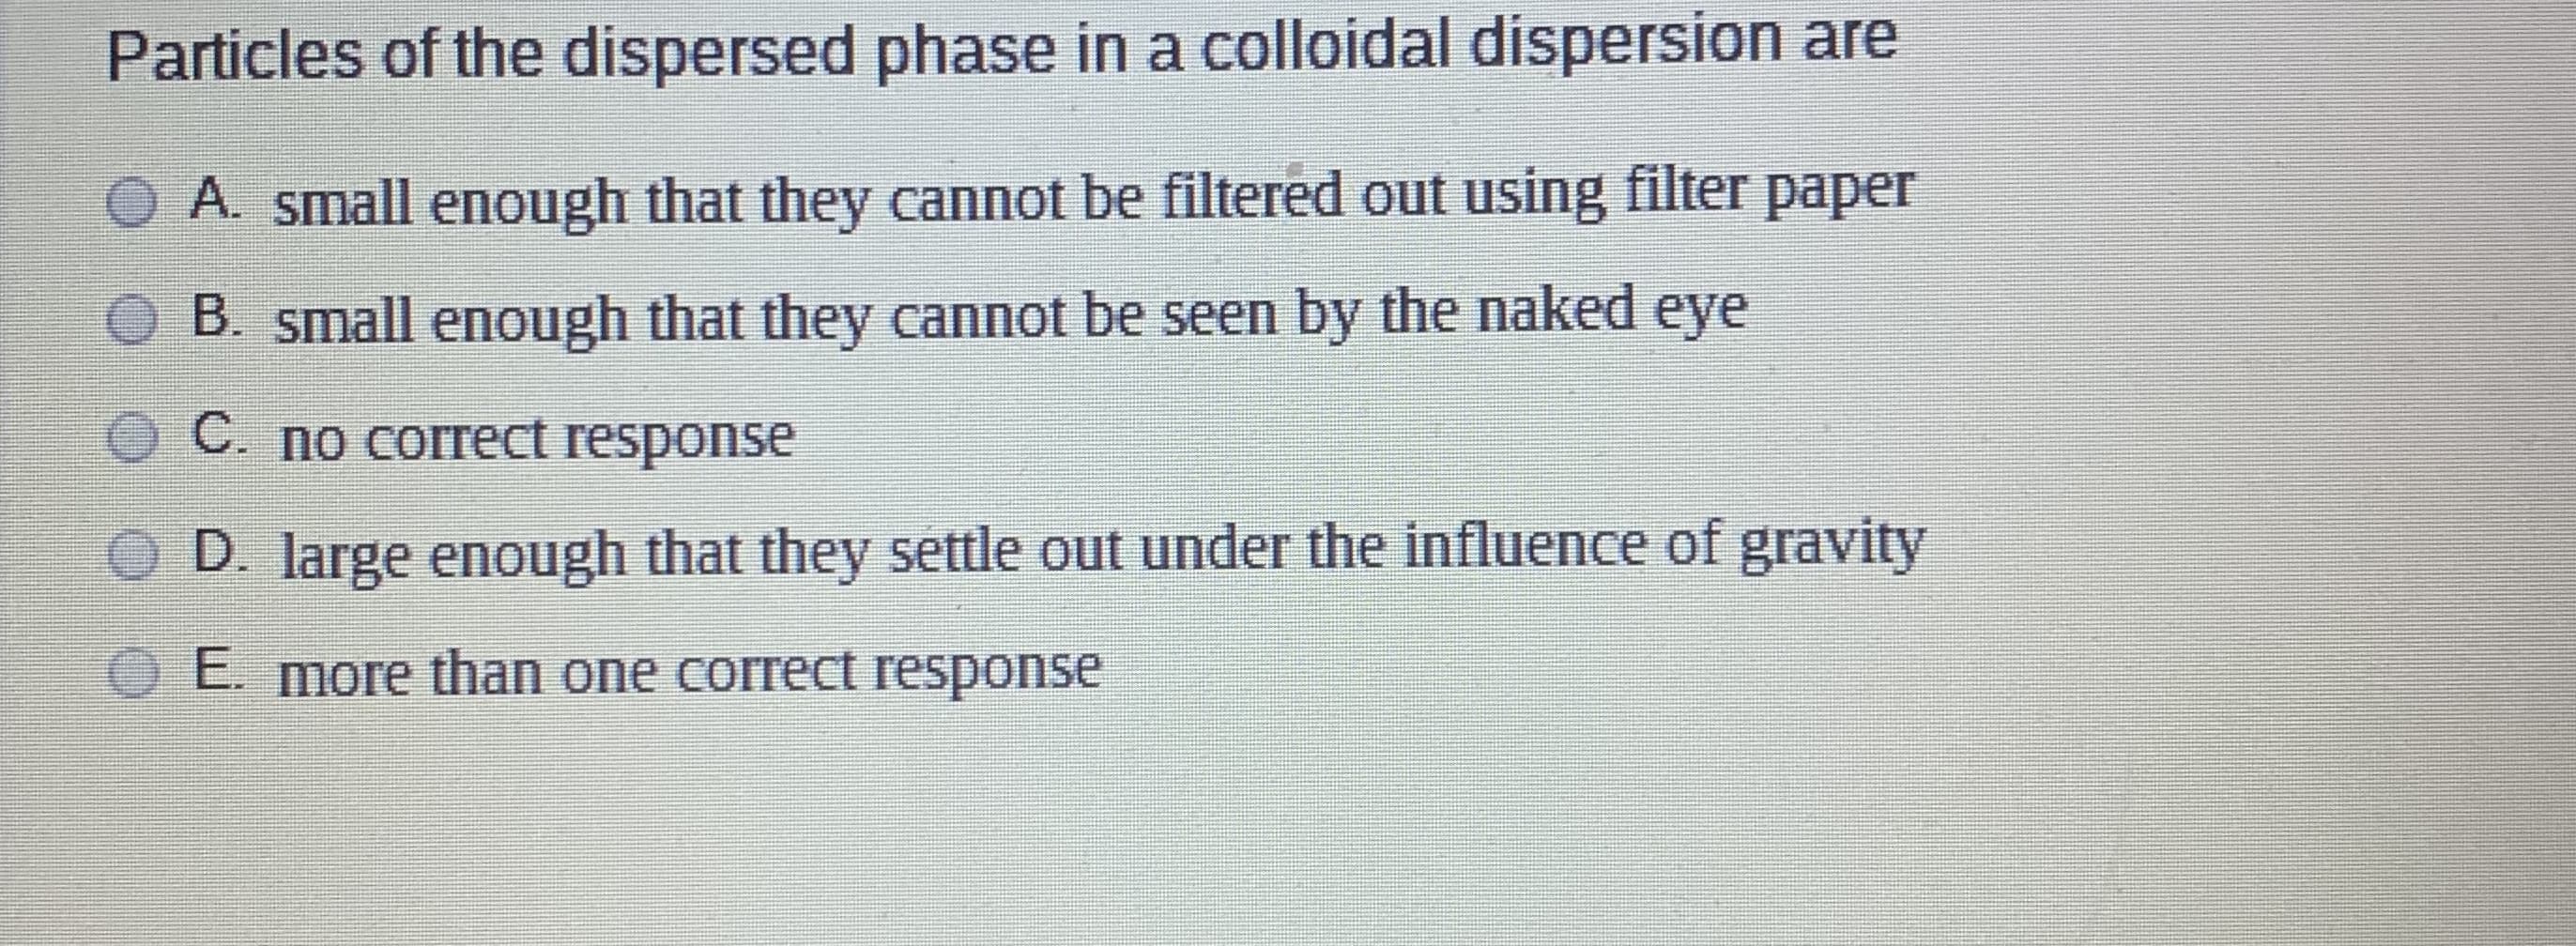 Particles of the dispersed phase in a colloidal dispersion are
A. small enough that they cannot be filtered out using filter paper
B. small enough that they cannot be seen by the naked eye
C. no correct response
D. large enough that they settle out under the influence of gravity
E. more than one correct response
